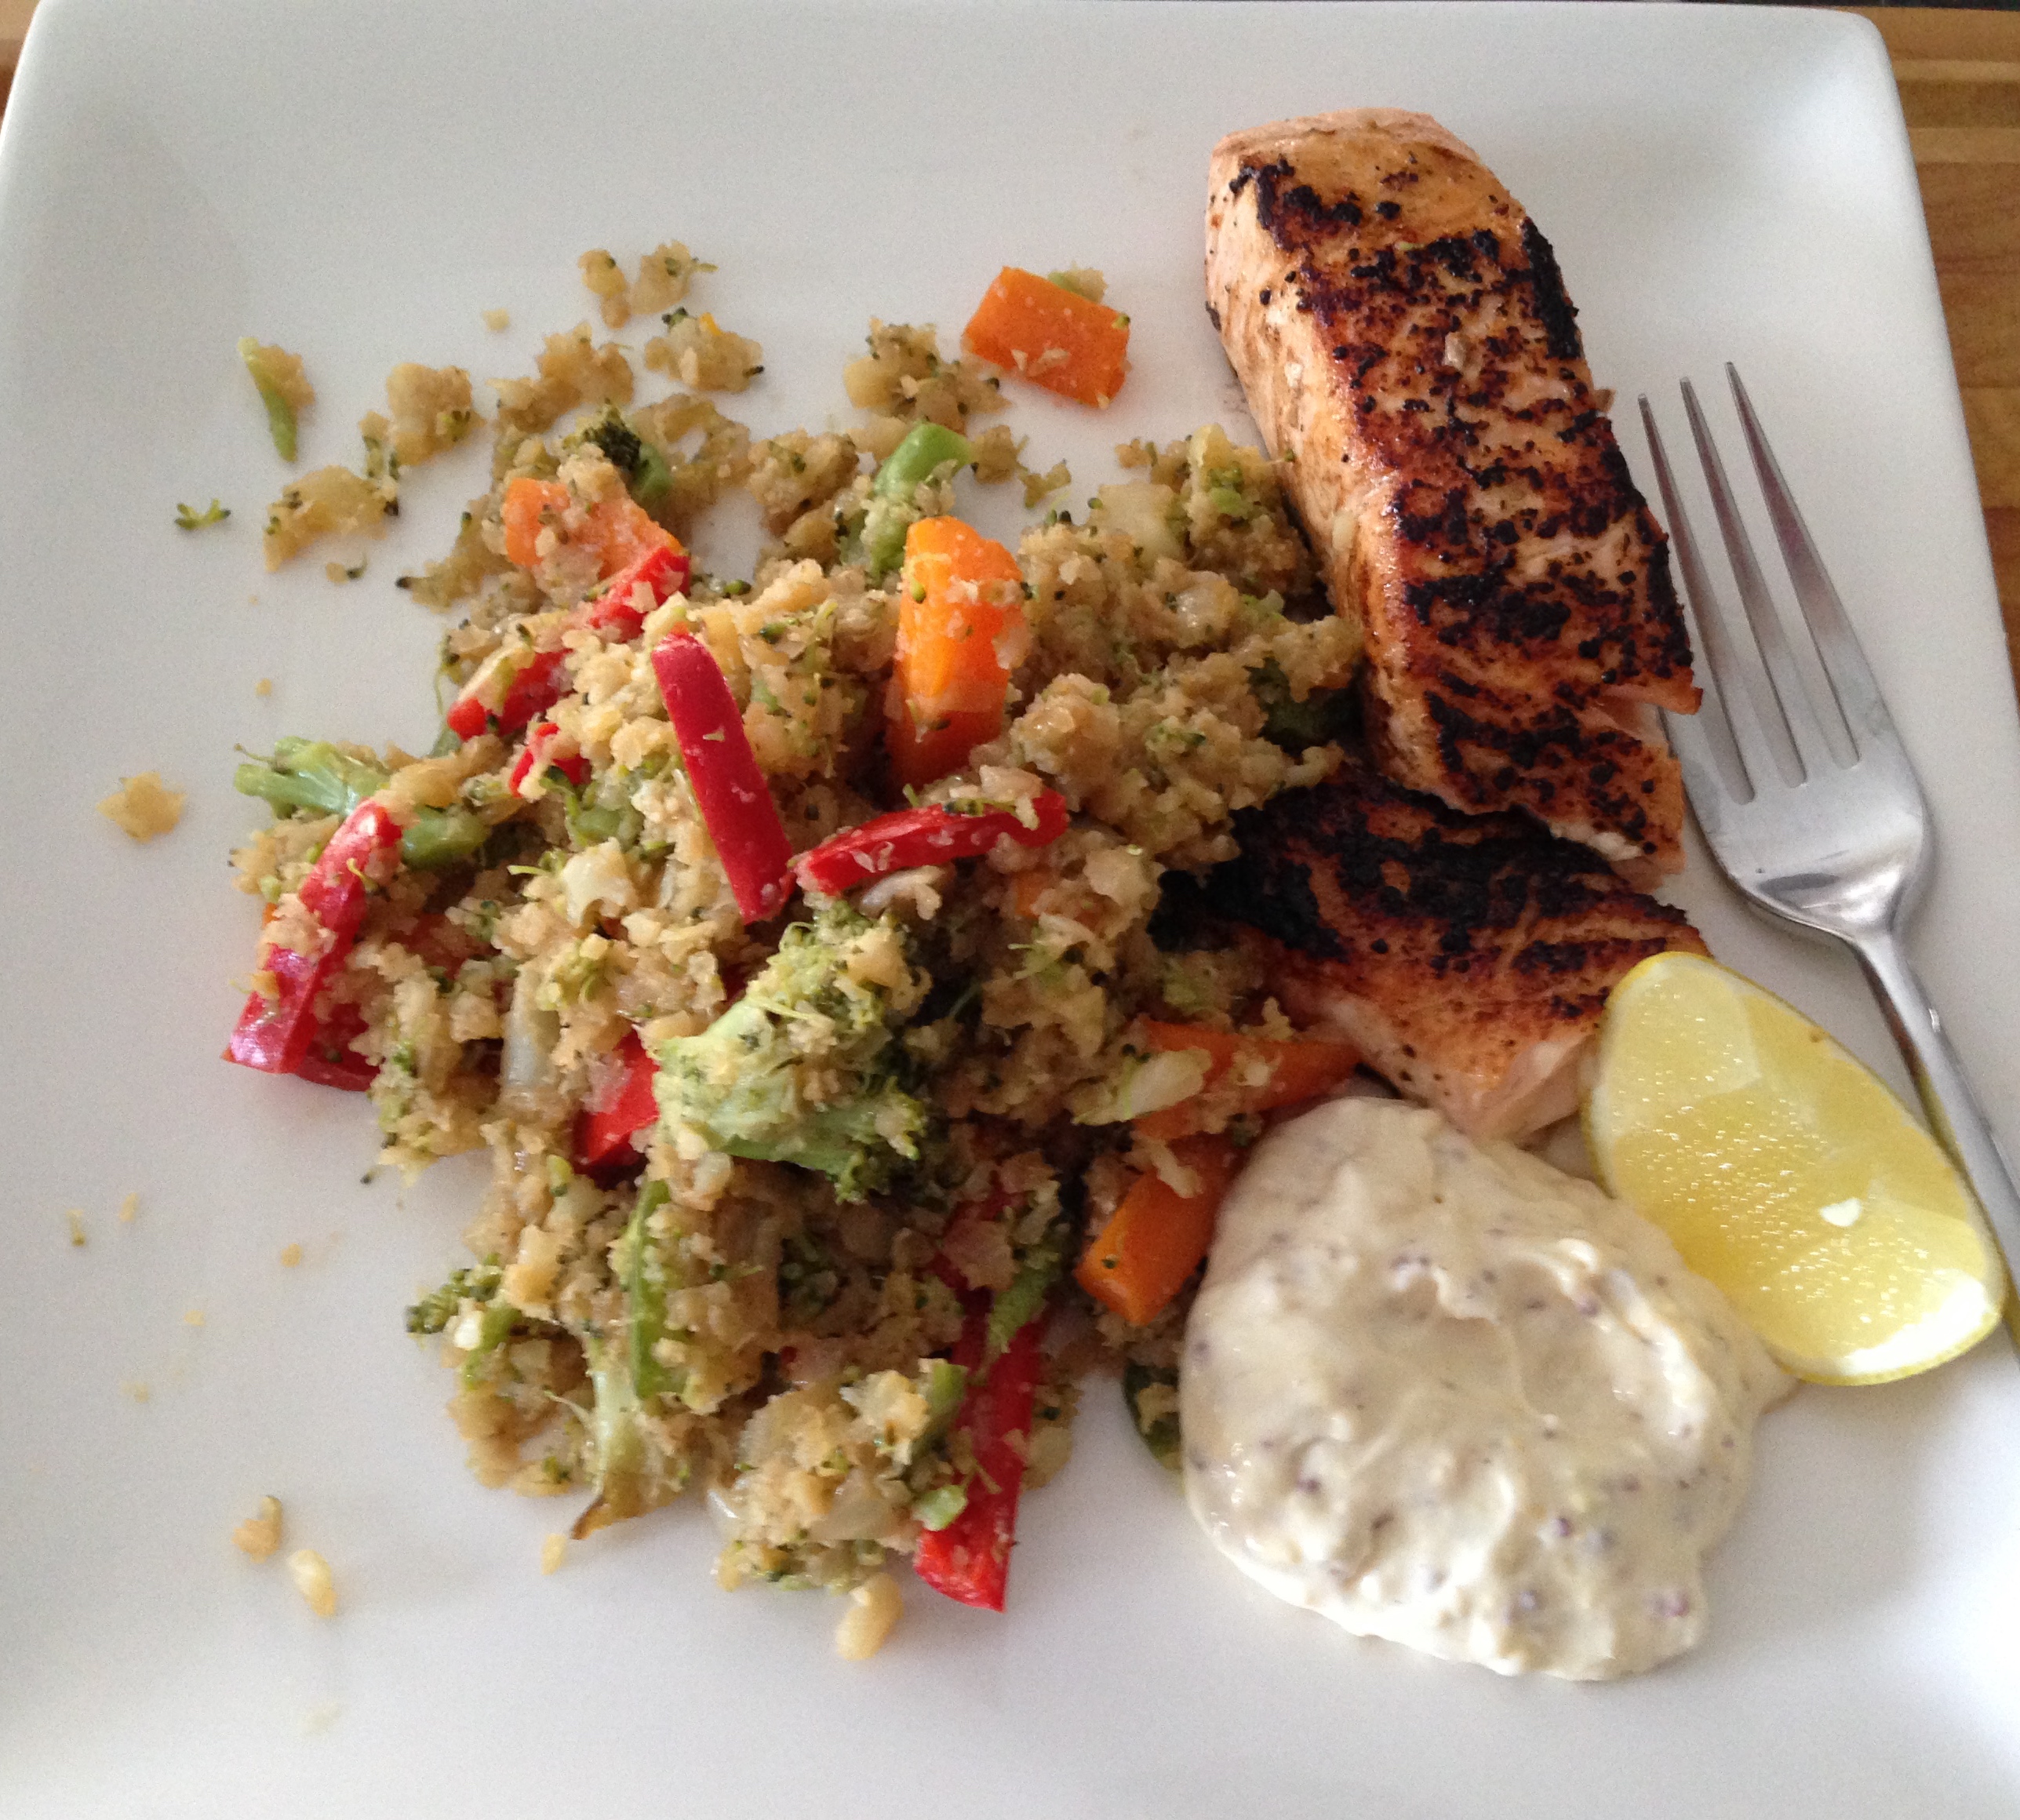 Salmon and cauliflower rice is a great healthy eating meal